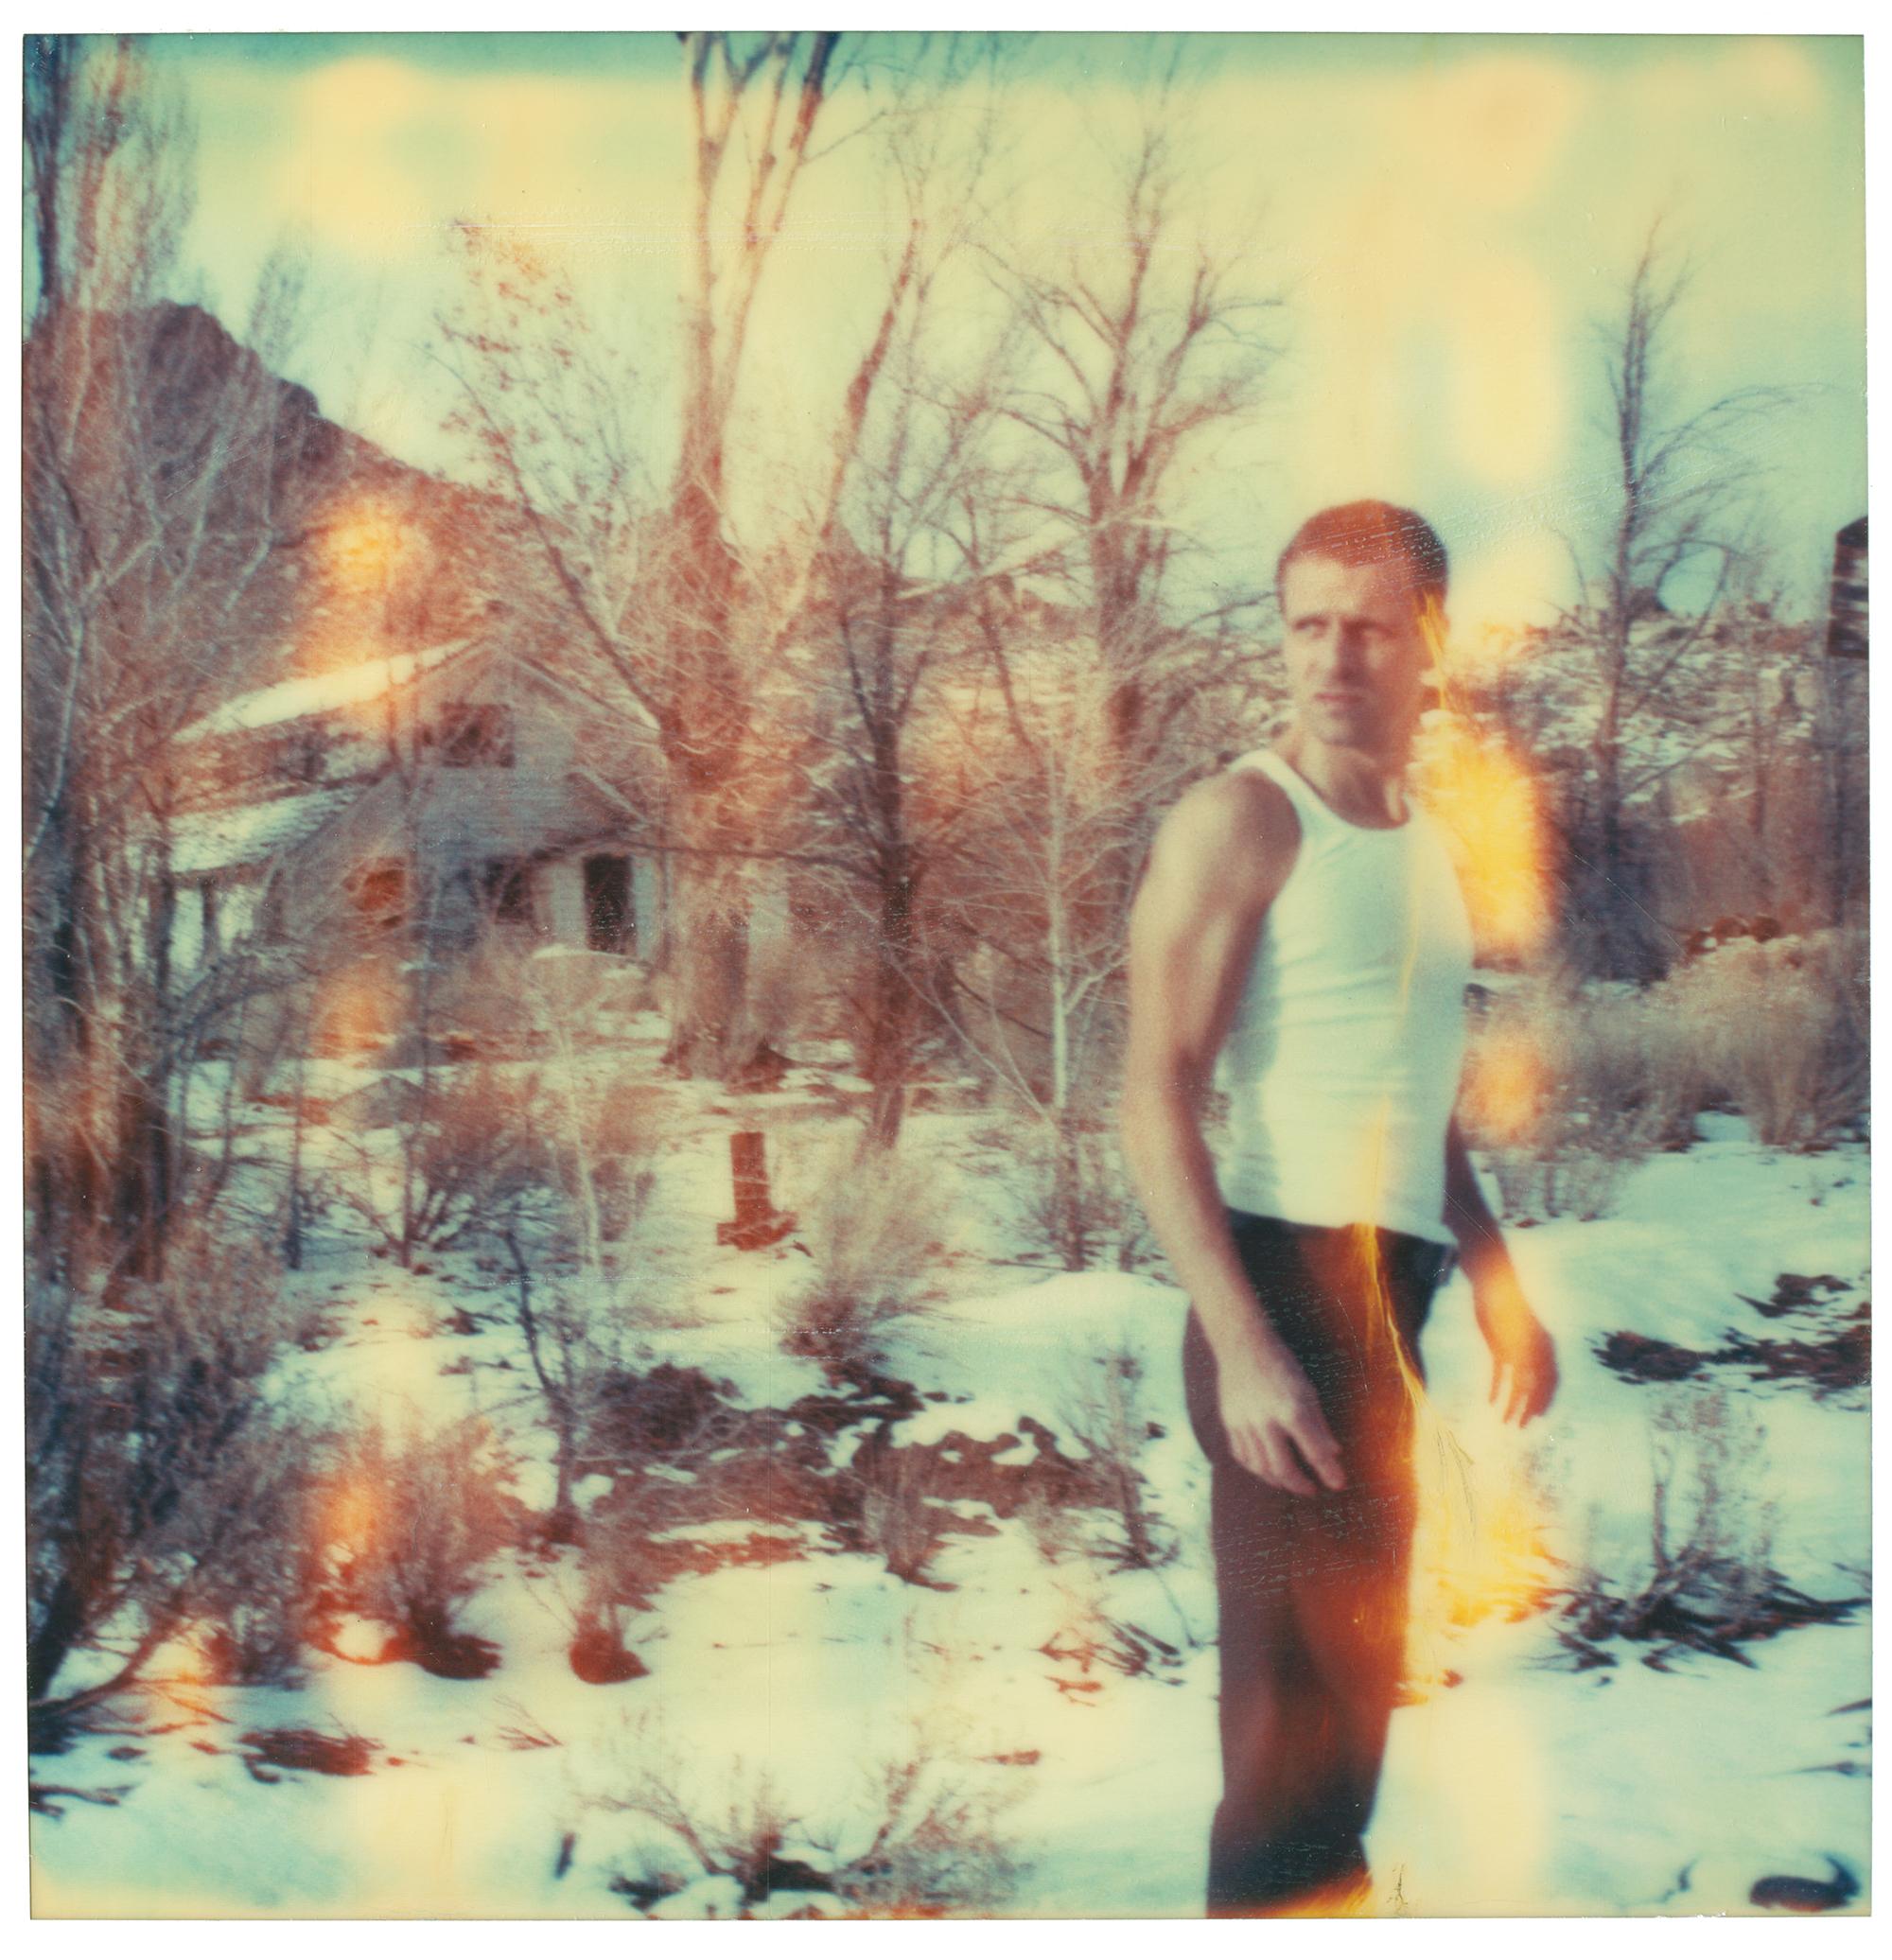 Stefanie Schneider Color Photograph - Young and Unaccountable (Wastelands) - Contemporary, Analog, Polaroid, Color